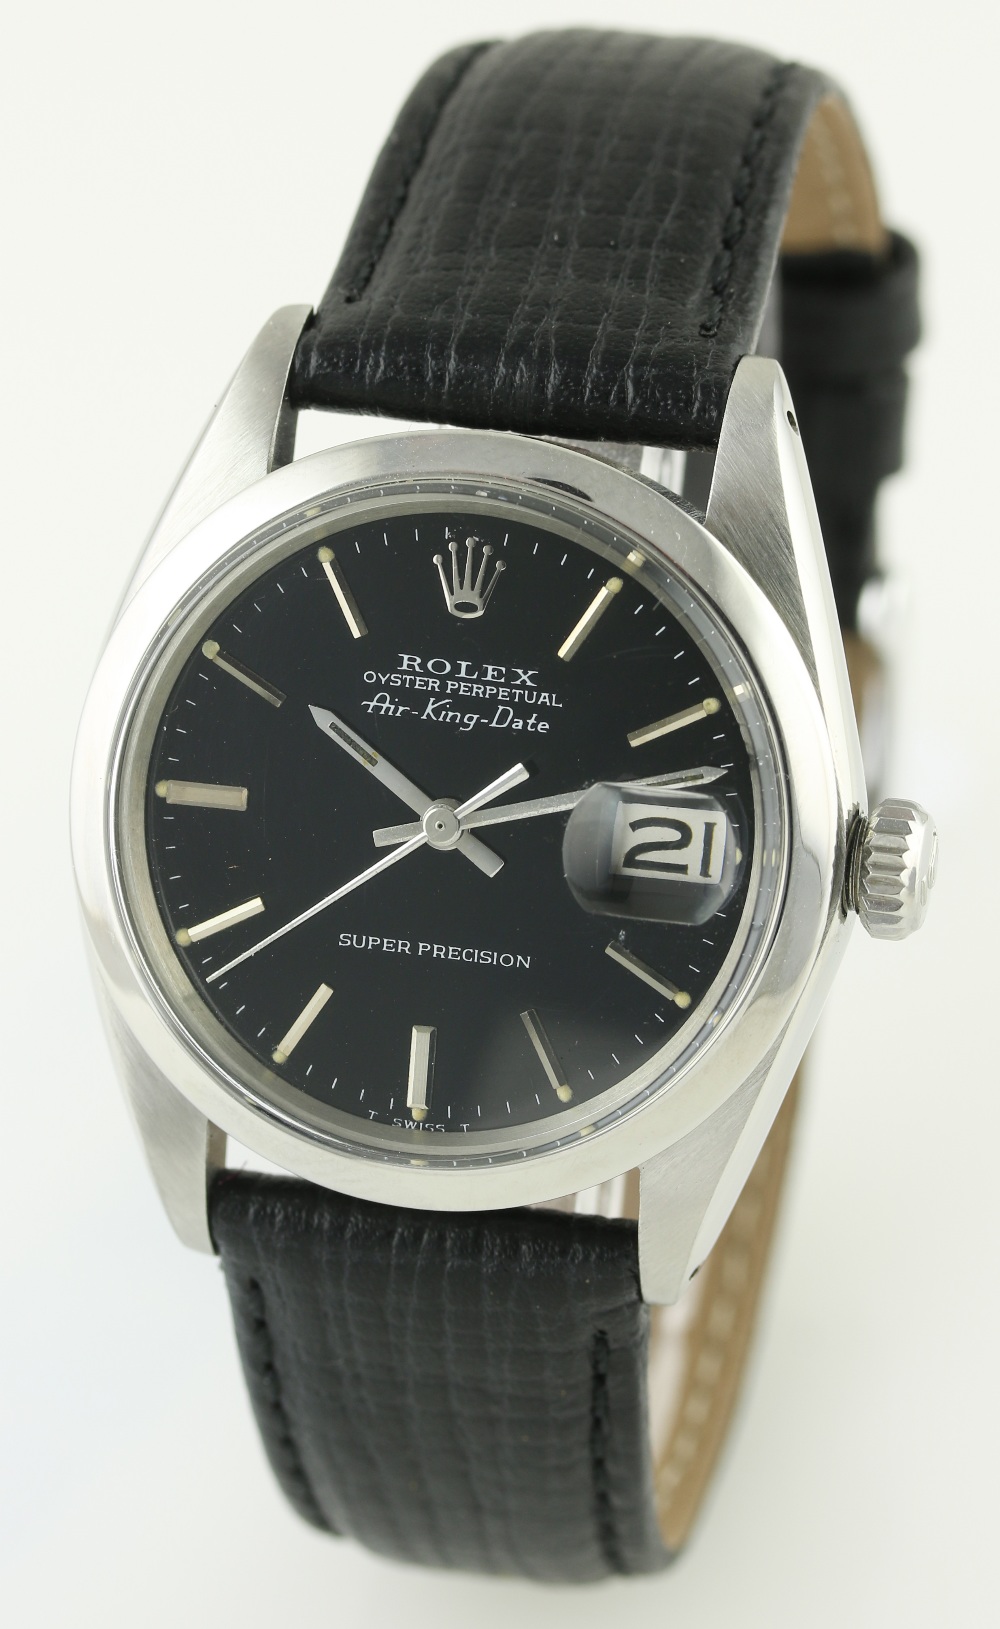 A GENTLEMAN'S STAINLESS STEEL ROLEX OYSTER PERPETUAL AIR KING DATE SUPER PRECISION WRIST WATCH CIRCA - Image 2 of 8